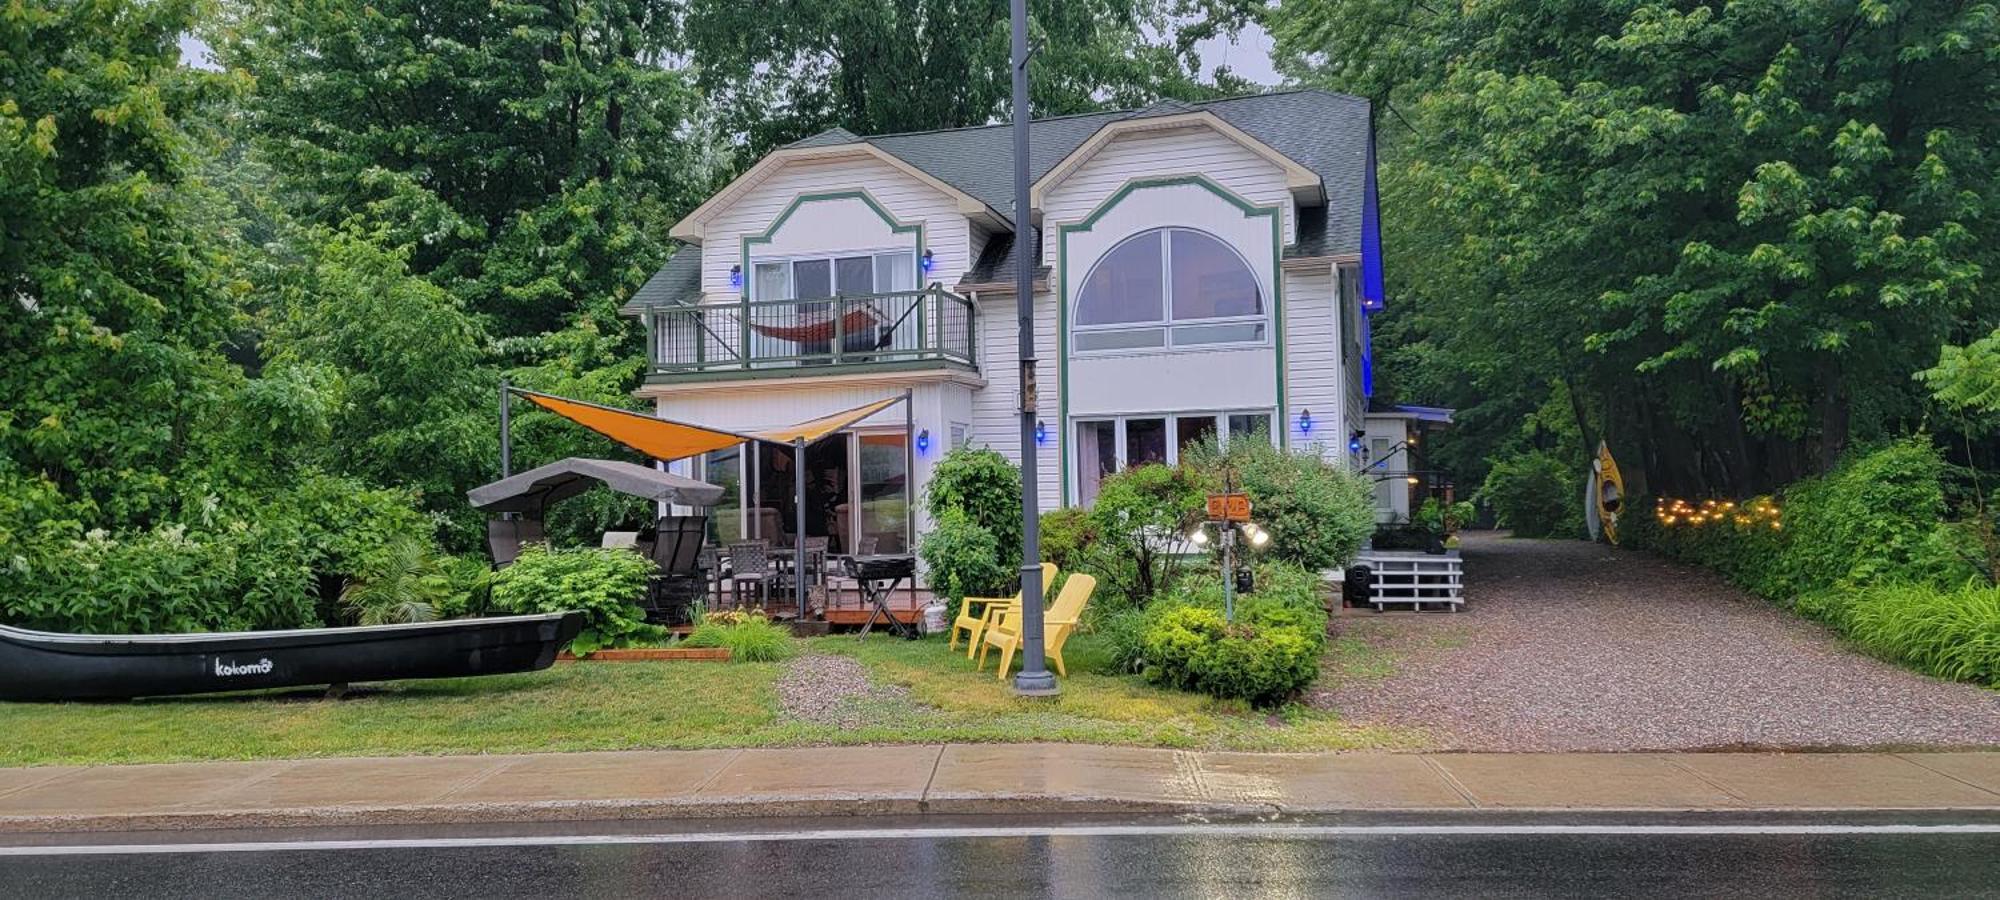 Kokomo Inn Bed And Breakfast Ottawa-Gatineau'S Only Tropical Riverfront B&B On The National Capital Cycling Pathway Route Verte #1 - For Adults Only - Chambre D'Hotes Tropical Aux Berges Des Outaouais Bnb #17542O Exteriér fotografie